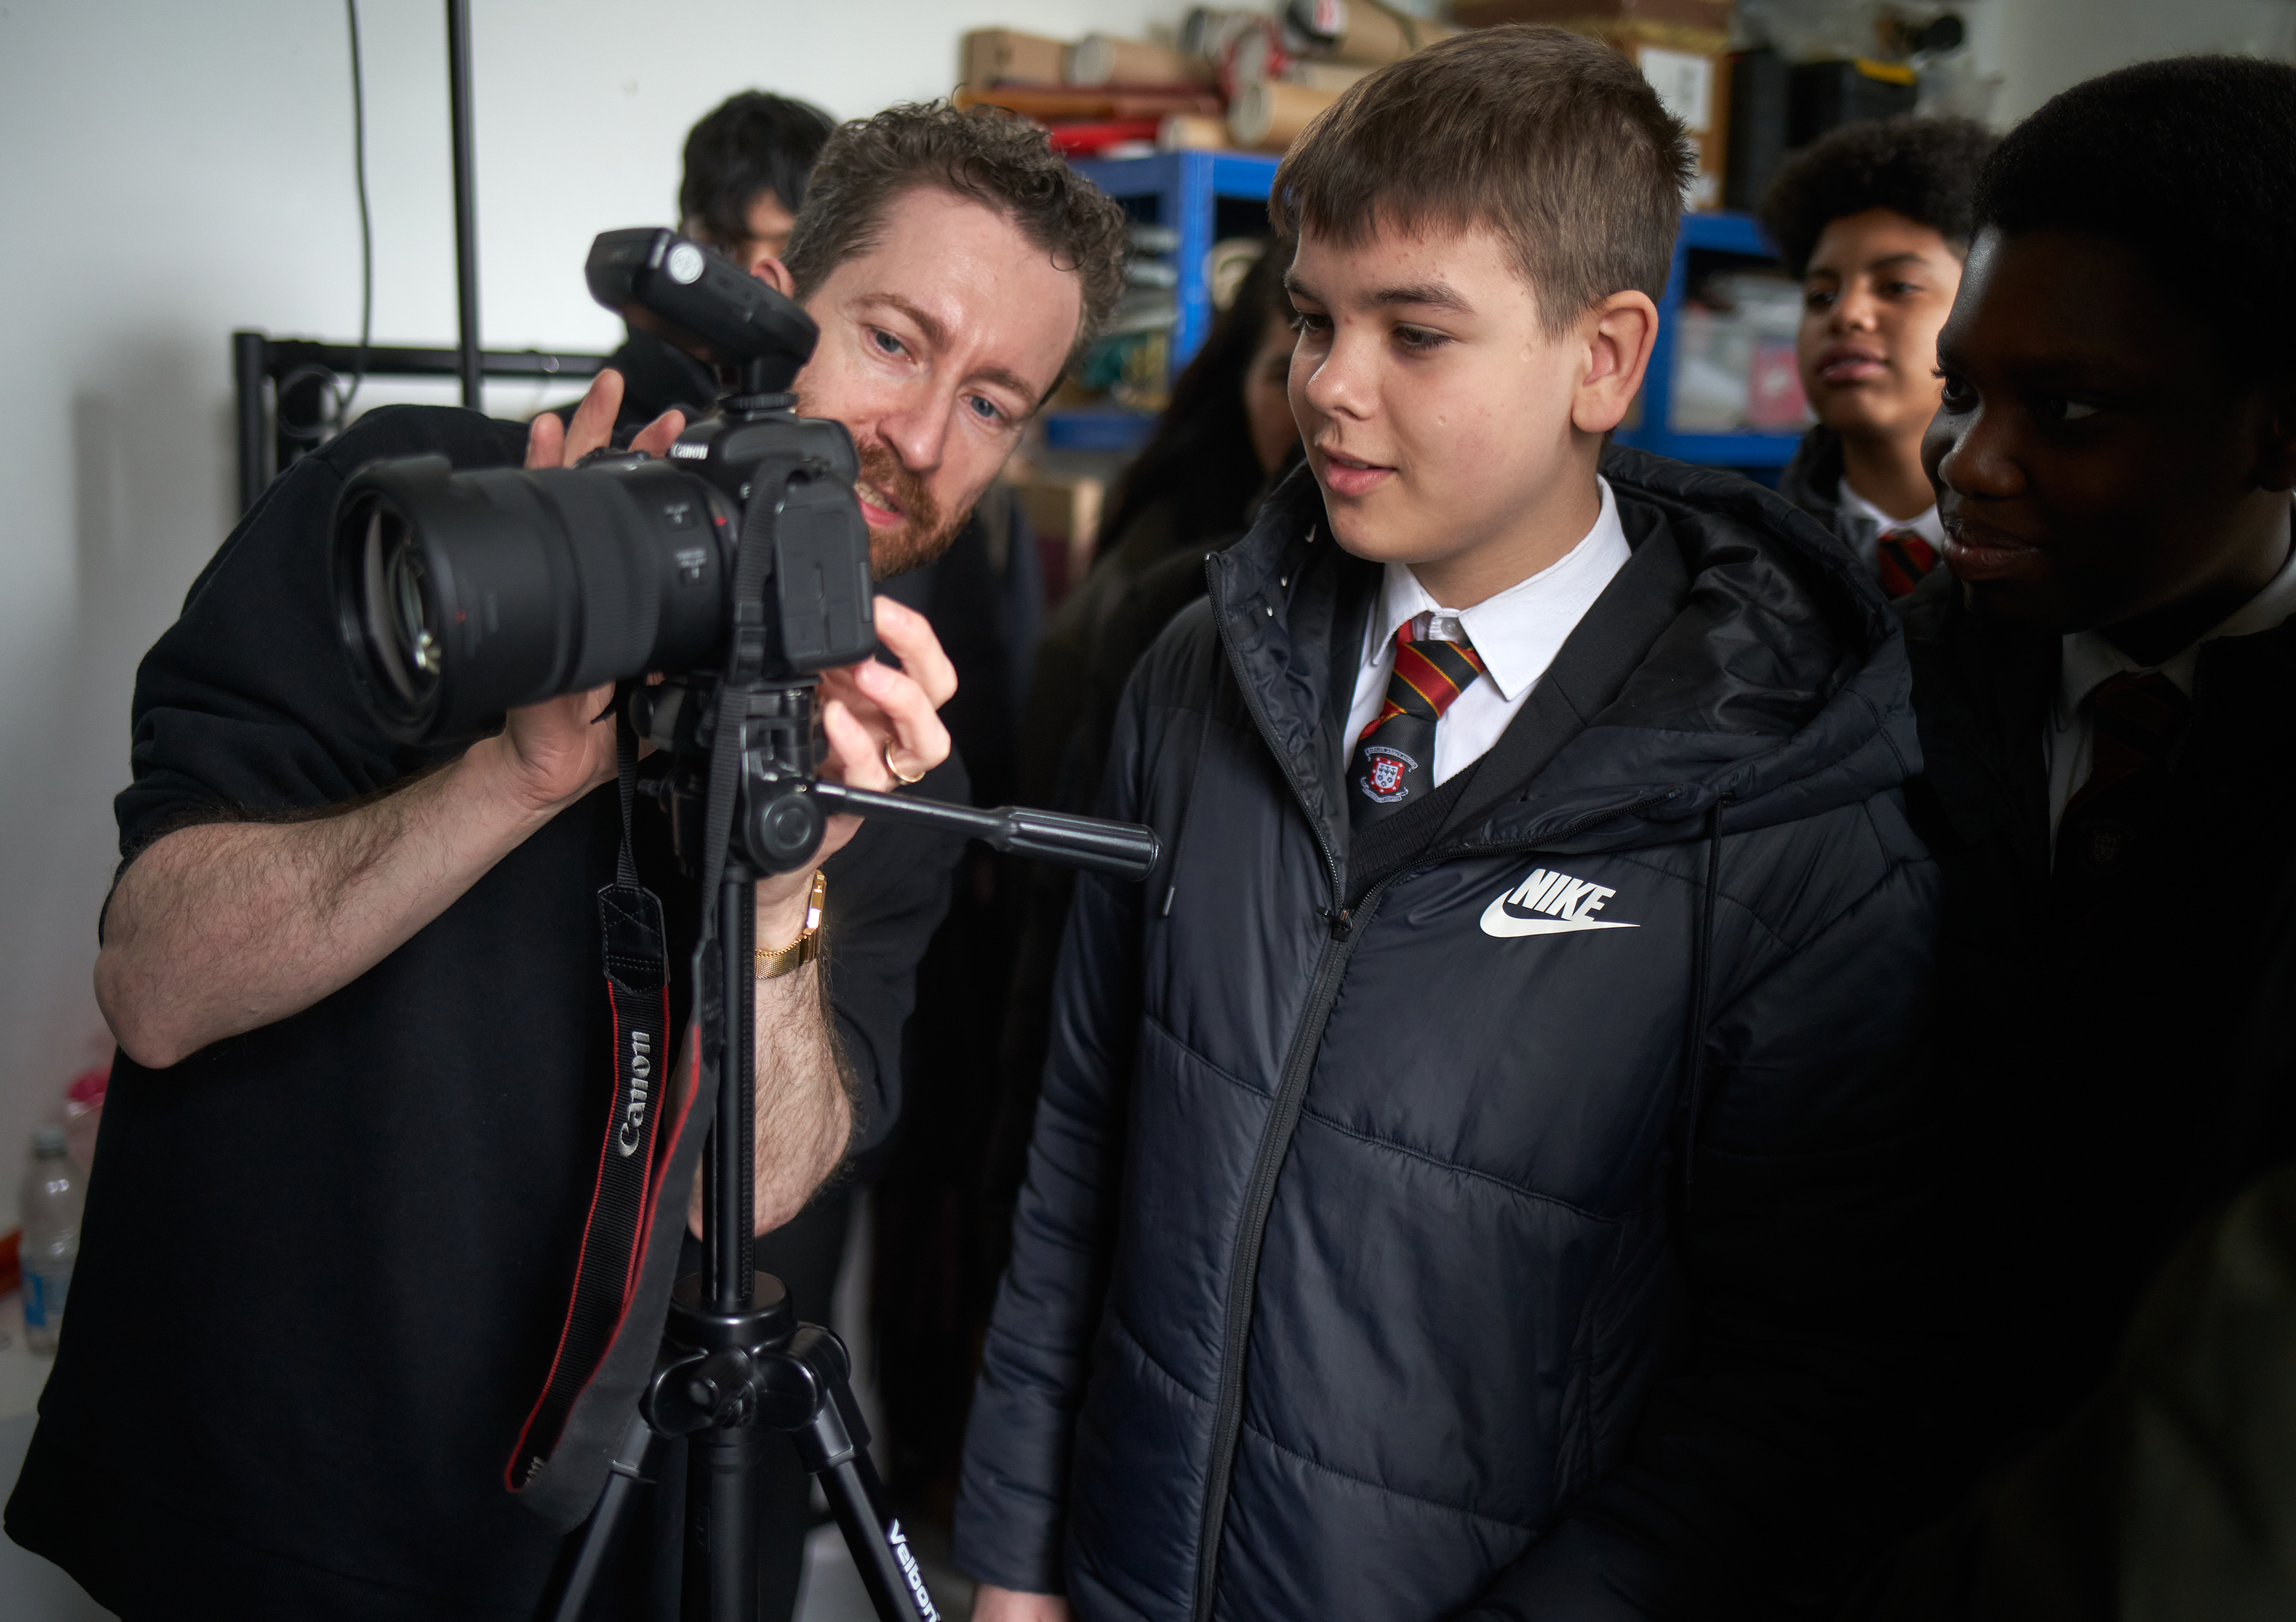 Jonny Bosworth taking photos with students from Barking Abbey School